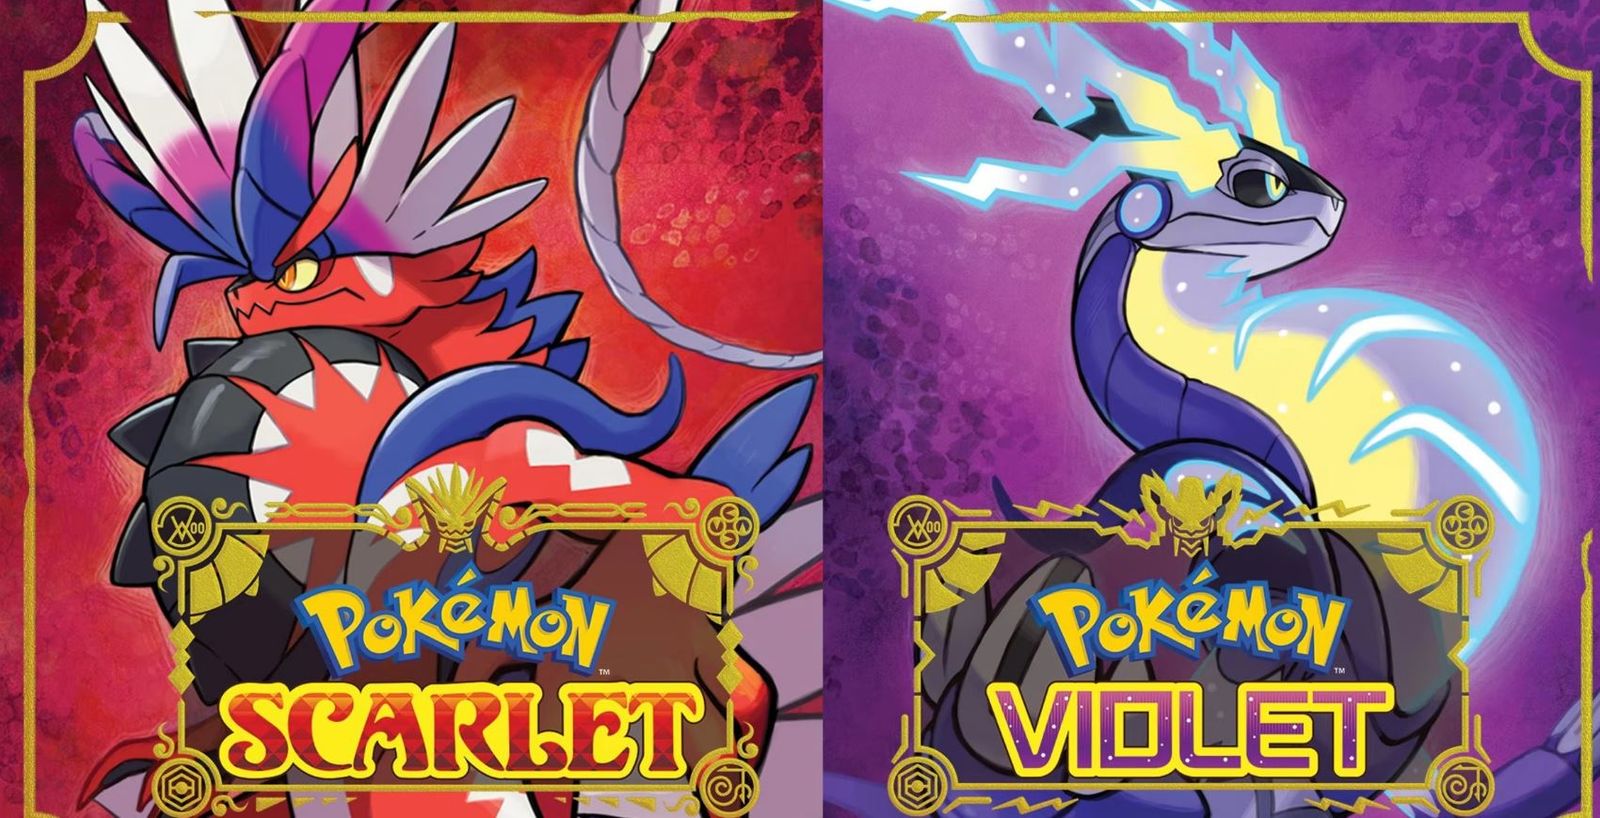 Choosing Pokemon Violet is a necessary part of getting a Ceruledge